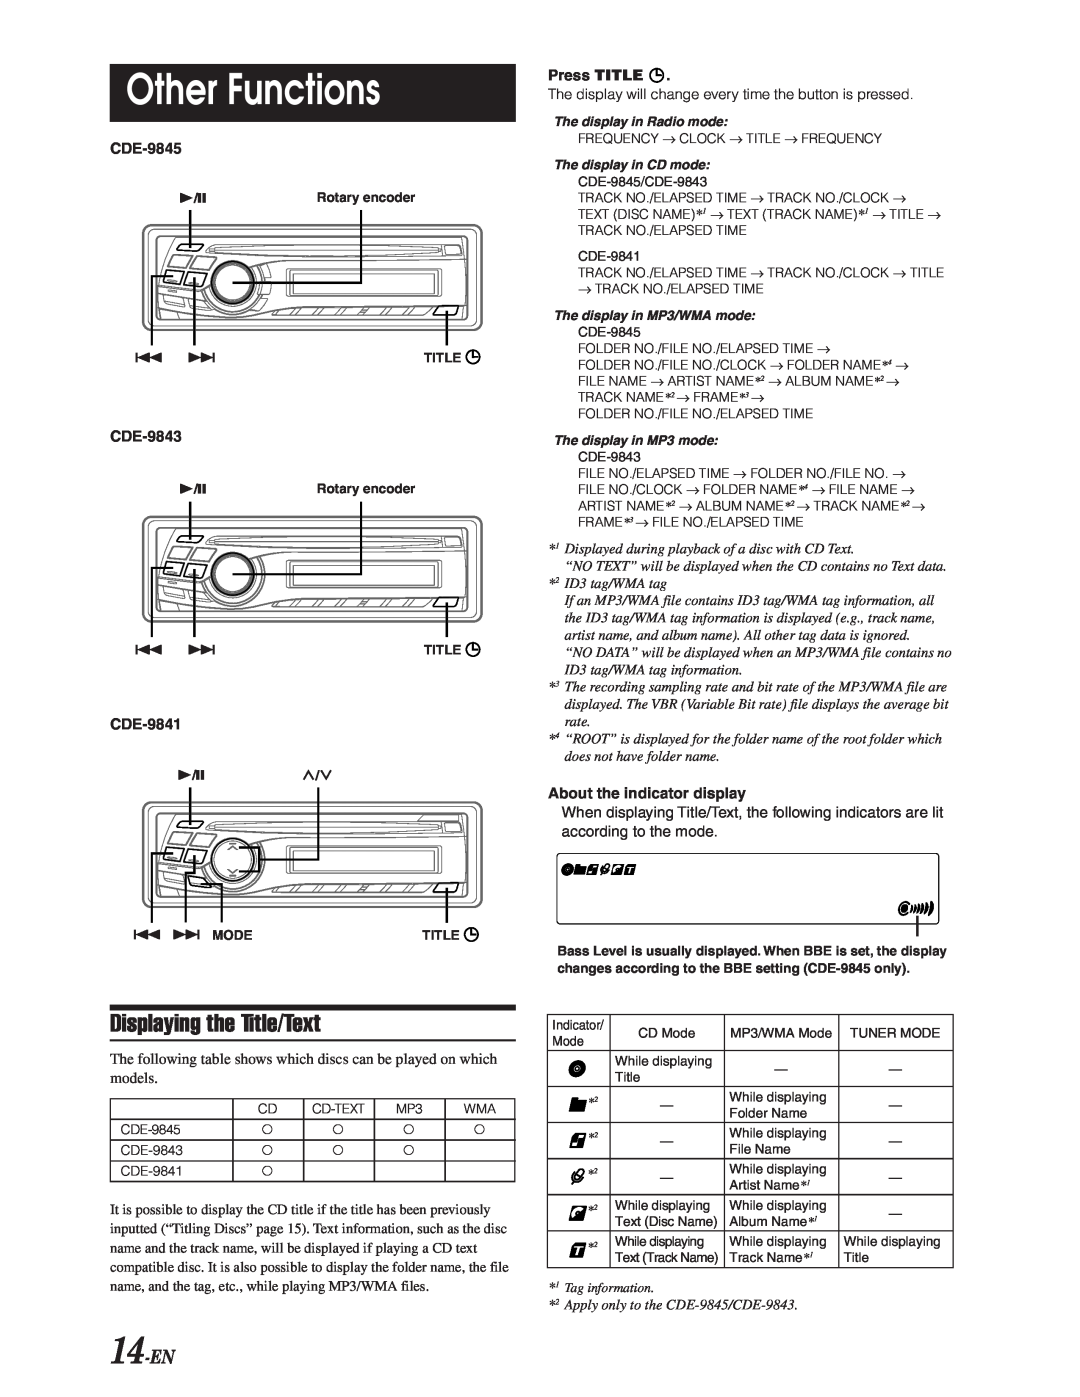 Alpine CDE-9843, CDE-9841, CDE-9845 owner manual Other Functions, Displaying the Title/Text, 14-EN 